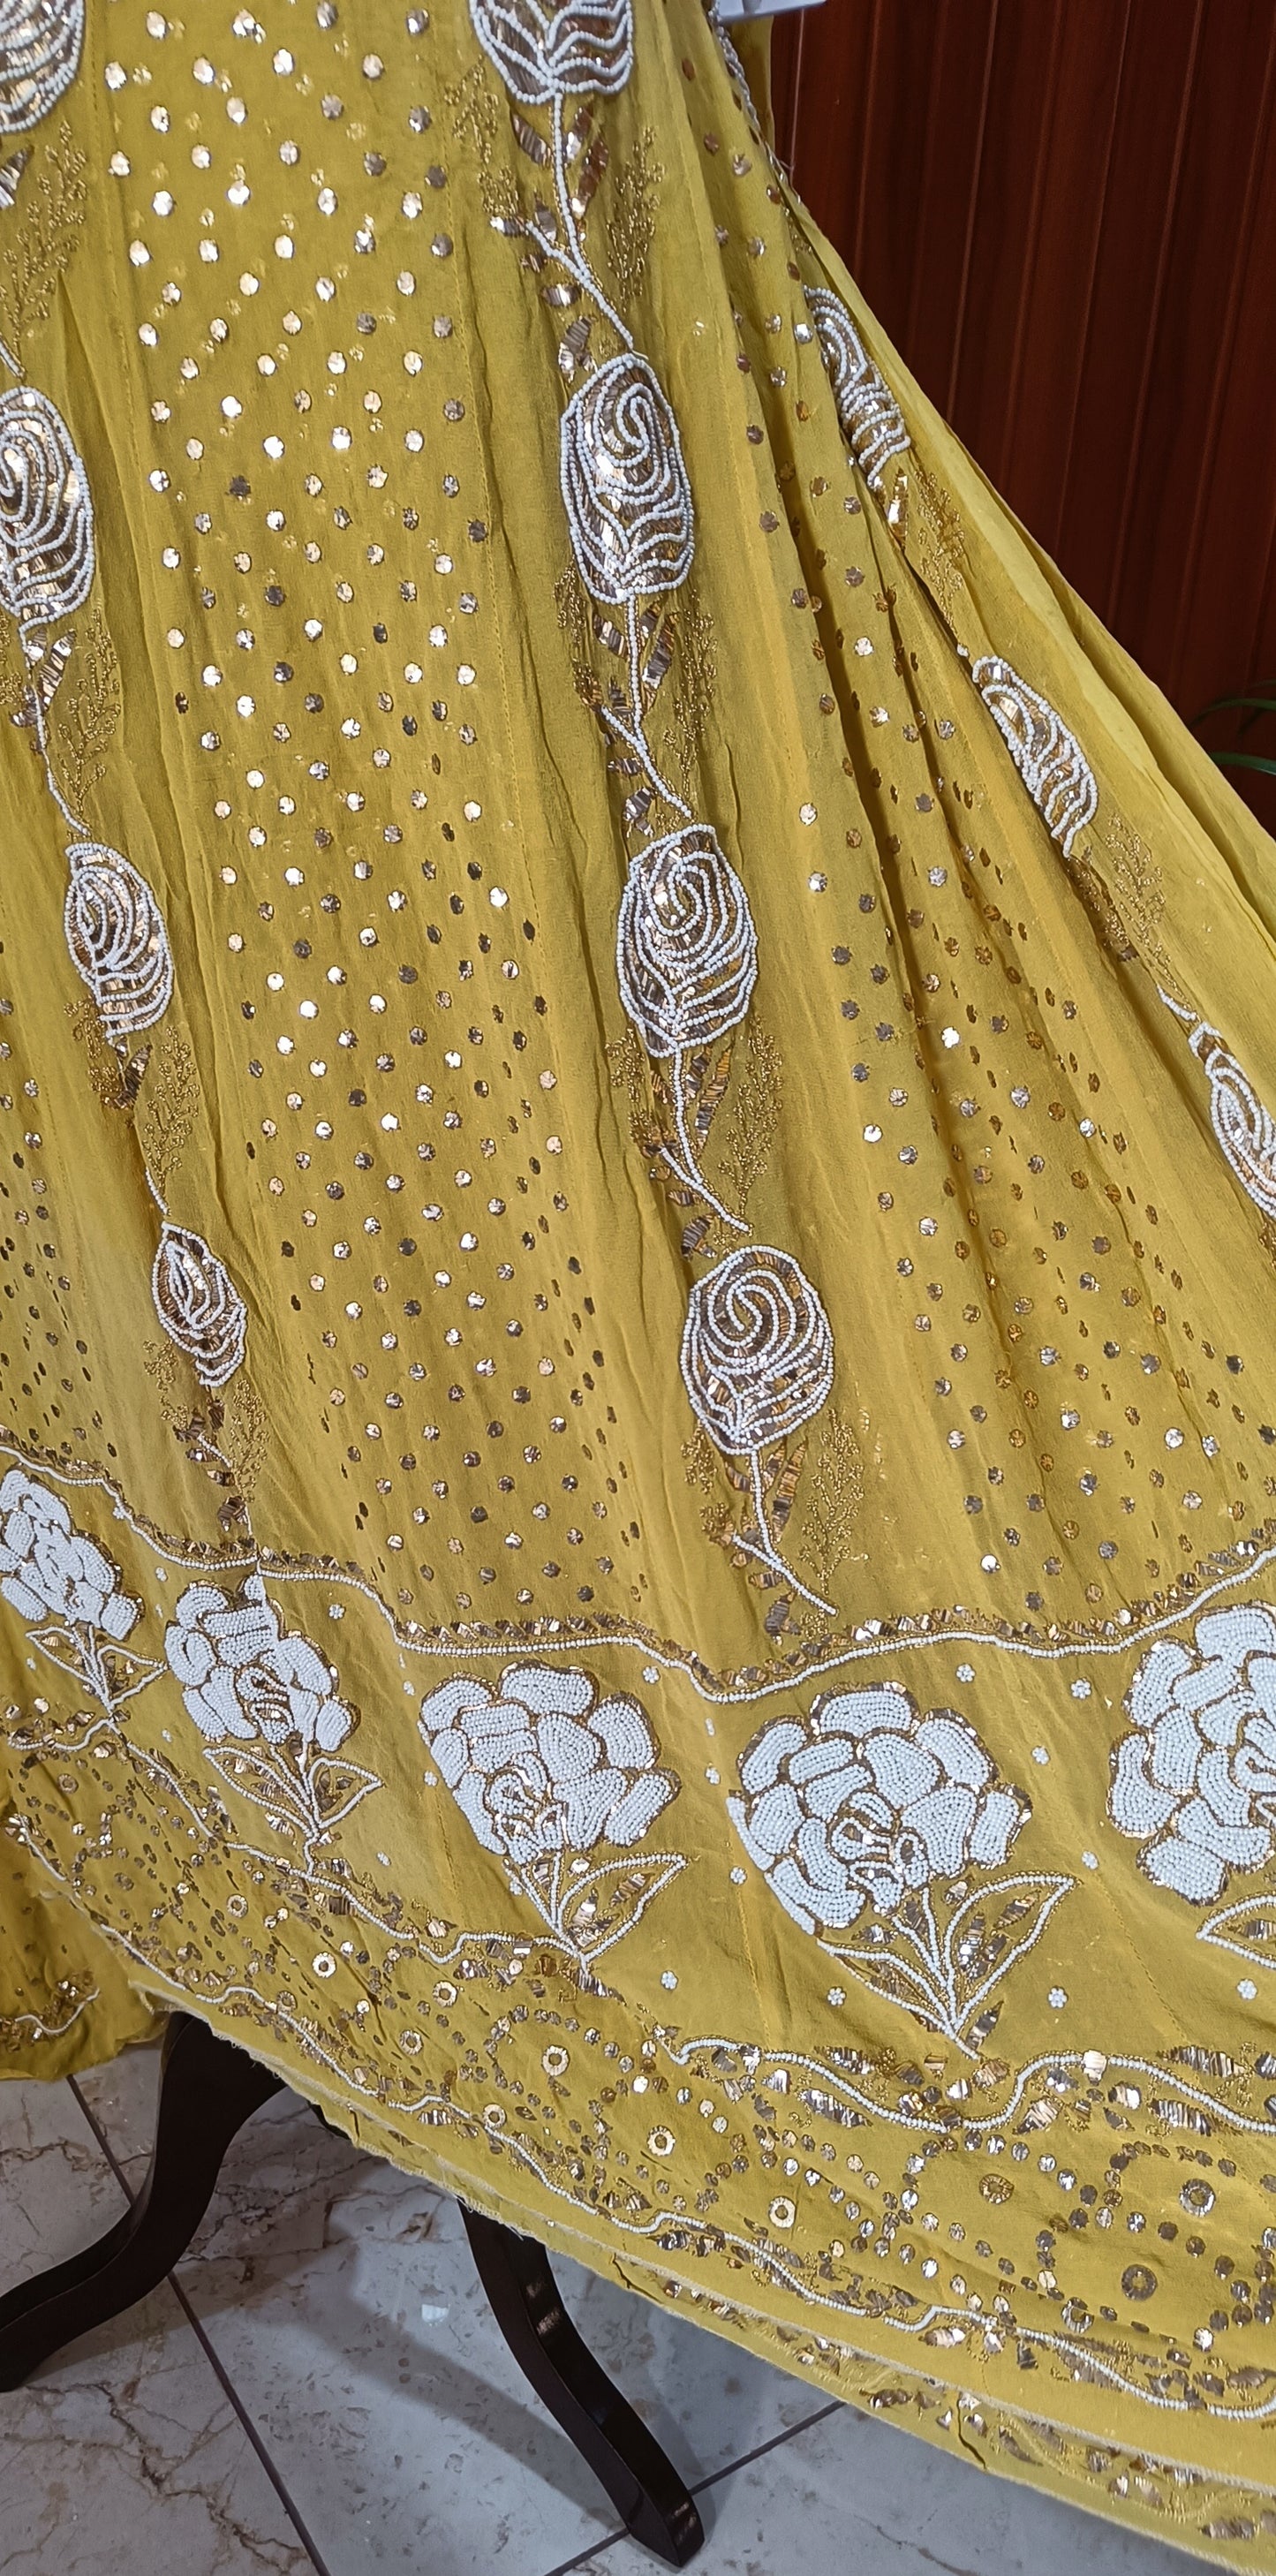 Mustard Yellow Ruhani Badla and Pearl Embroidered Anarkali Suit